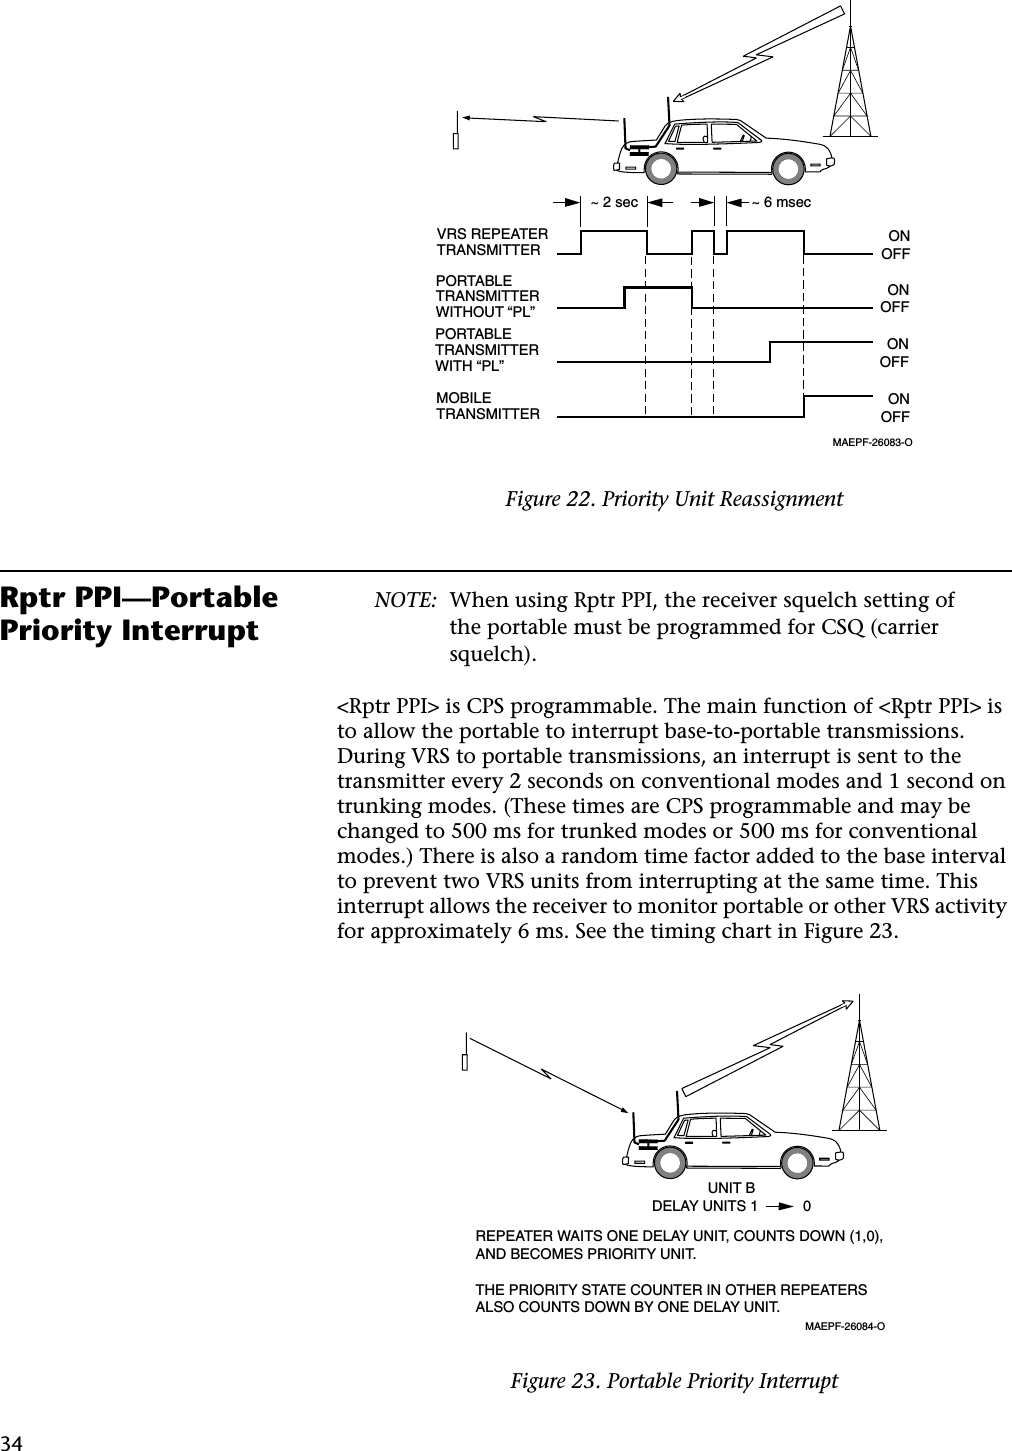 34Rptr PPI—Portable Priority InterruptNOTE: When using Rptr PPI, the receiver squelch setting of the portable must be programmed for CSQ (carrier squelch).&lt;Rptr PPI&gt; is CPS programmable. The main function of &lt;Rptr PPI&gt; is to allow the portable to interrupt base-to-portable transmissions. During VRS to portable transmissions, an interrupt is sent to the transmitter every 2 seconds on conventional modes and 1 second on trunking modes. (These times are CPS programmable and may be changed to 500 ms for trunked modes or 500 ms for conventional modes.) There is also a random time factor added to the base interval to prevent two VRS units from interrupting at the same time. This interrupt allows the receiver to monitor portable or other VRS activity for approximately 6 ms. See the timing chart in Figure 23.Figure 22. Priority Unit ReassignmentMAEPF-26083-OVRS REPEATERTRANSMITTERPORTABLETRANSMITTERWITHOUT “PL”PORTABLETRANSMITTERWITH “PL”MOBILETRANSMITTERONOFFONOFFONOFFONOFF~ 2 sec ~ 6 msecFigure 23. Portable Priority InterruptUNIT BDELAY UNITS 1           0MAEPF-26084-OREPEATER WAITS ONE DELAY UNIT, COUNTS DOWN (1,0),AND BECOMES PRIORITY UNIT.THE PRIORITY STATE COUNTER IN OTHER REPEATERSALSO COUNTS DOWN BY ONE DELAY UNIT.